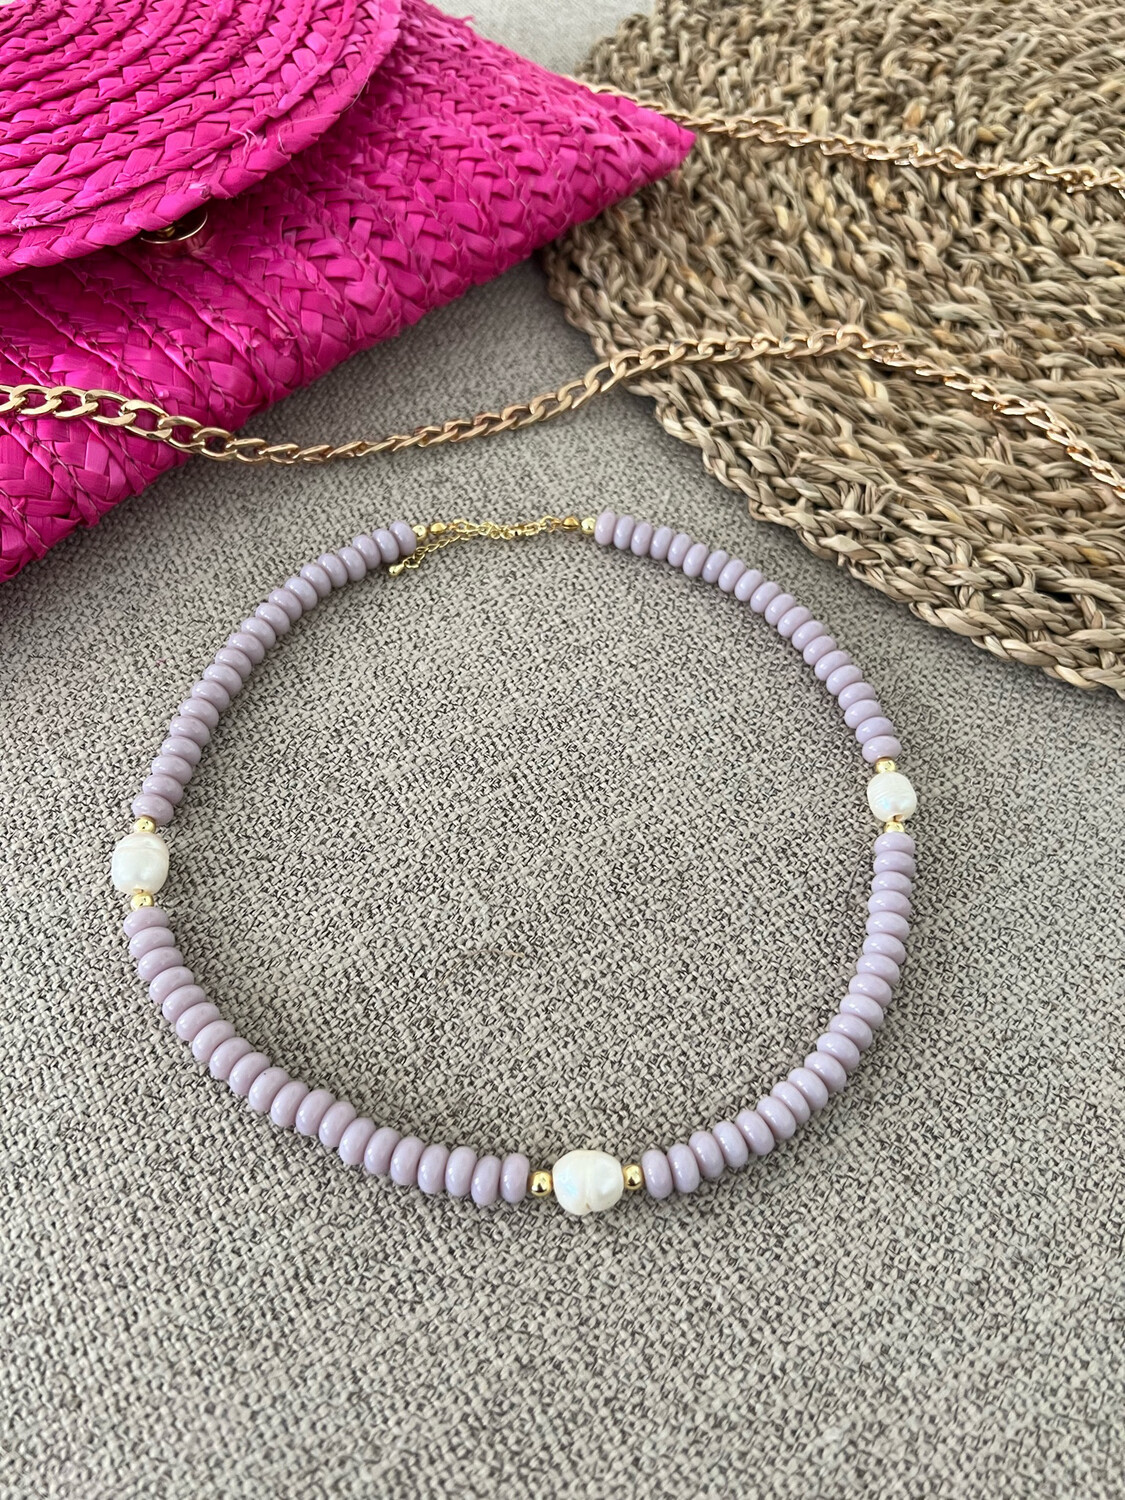 Lilac Beads & Pearls Handmade Necklace